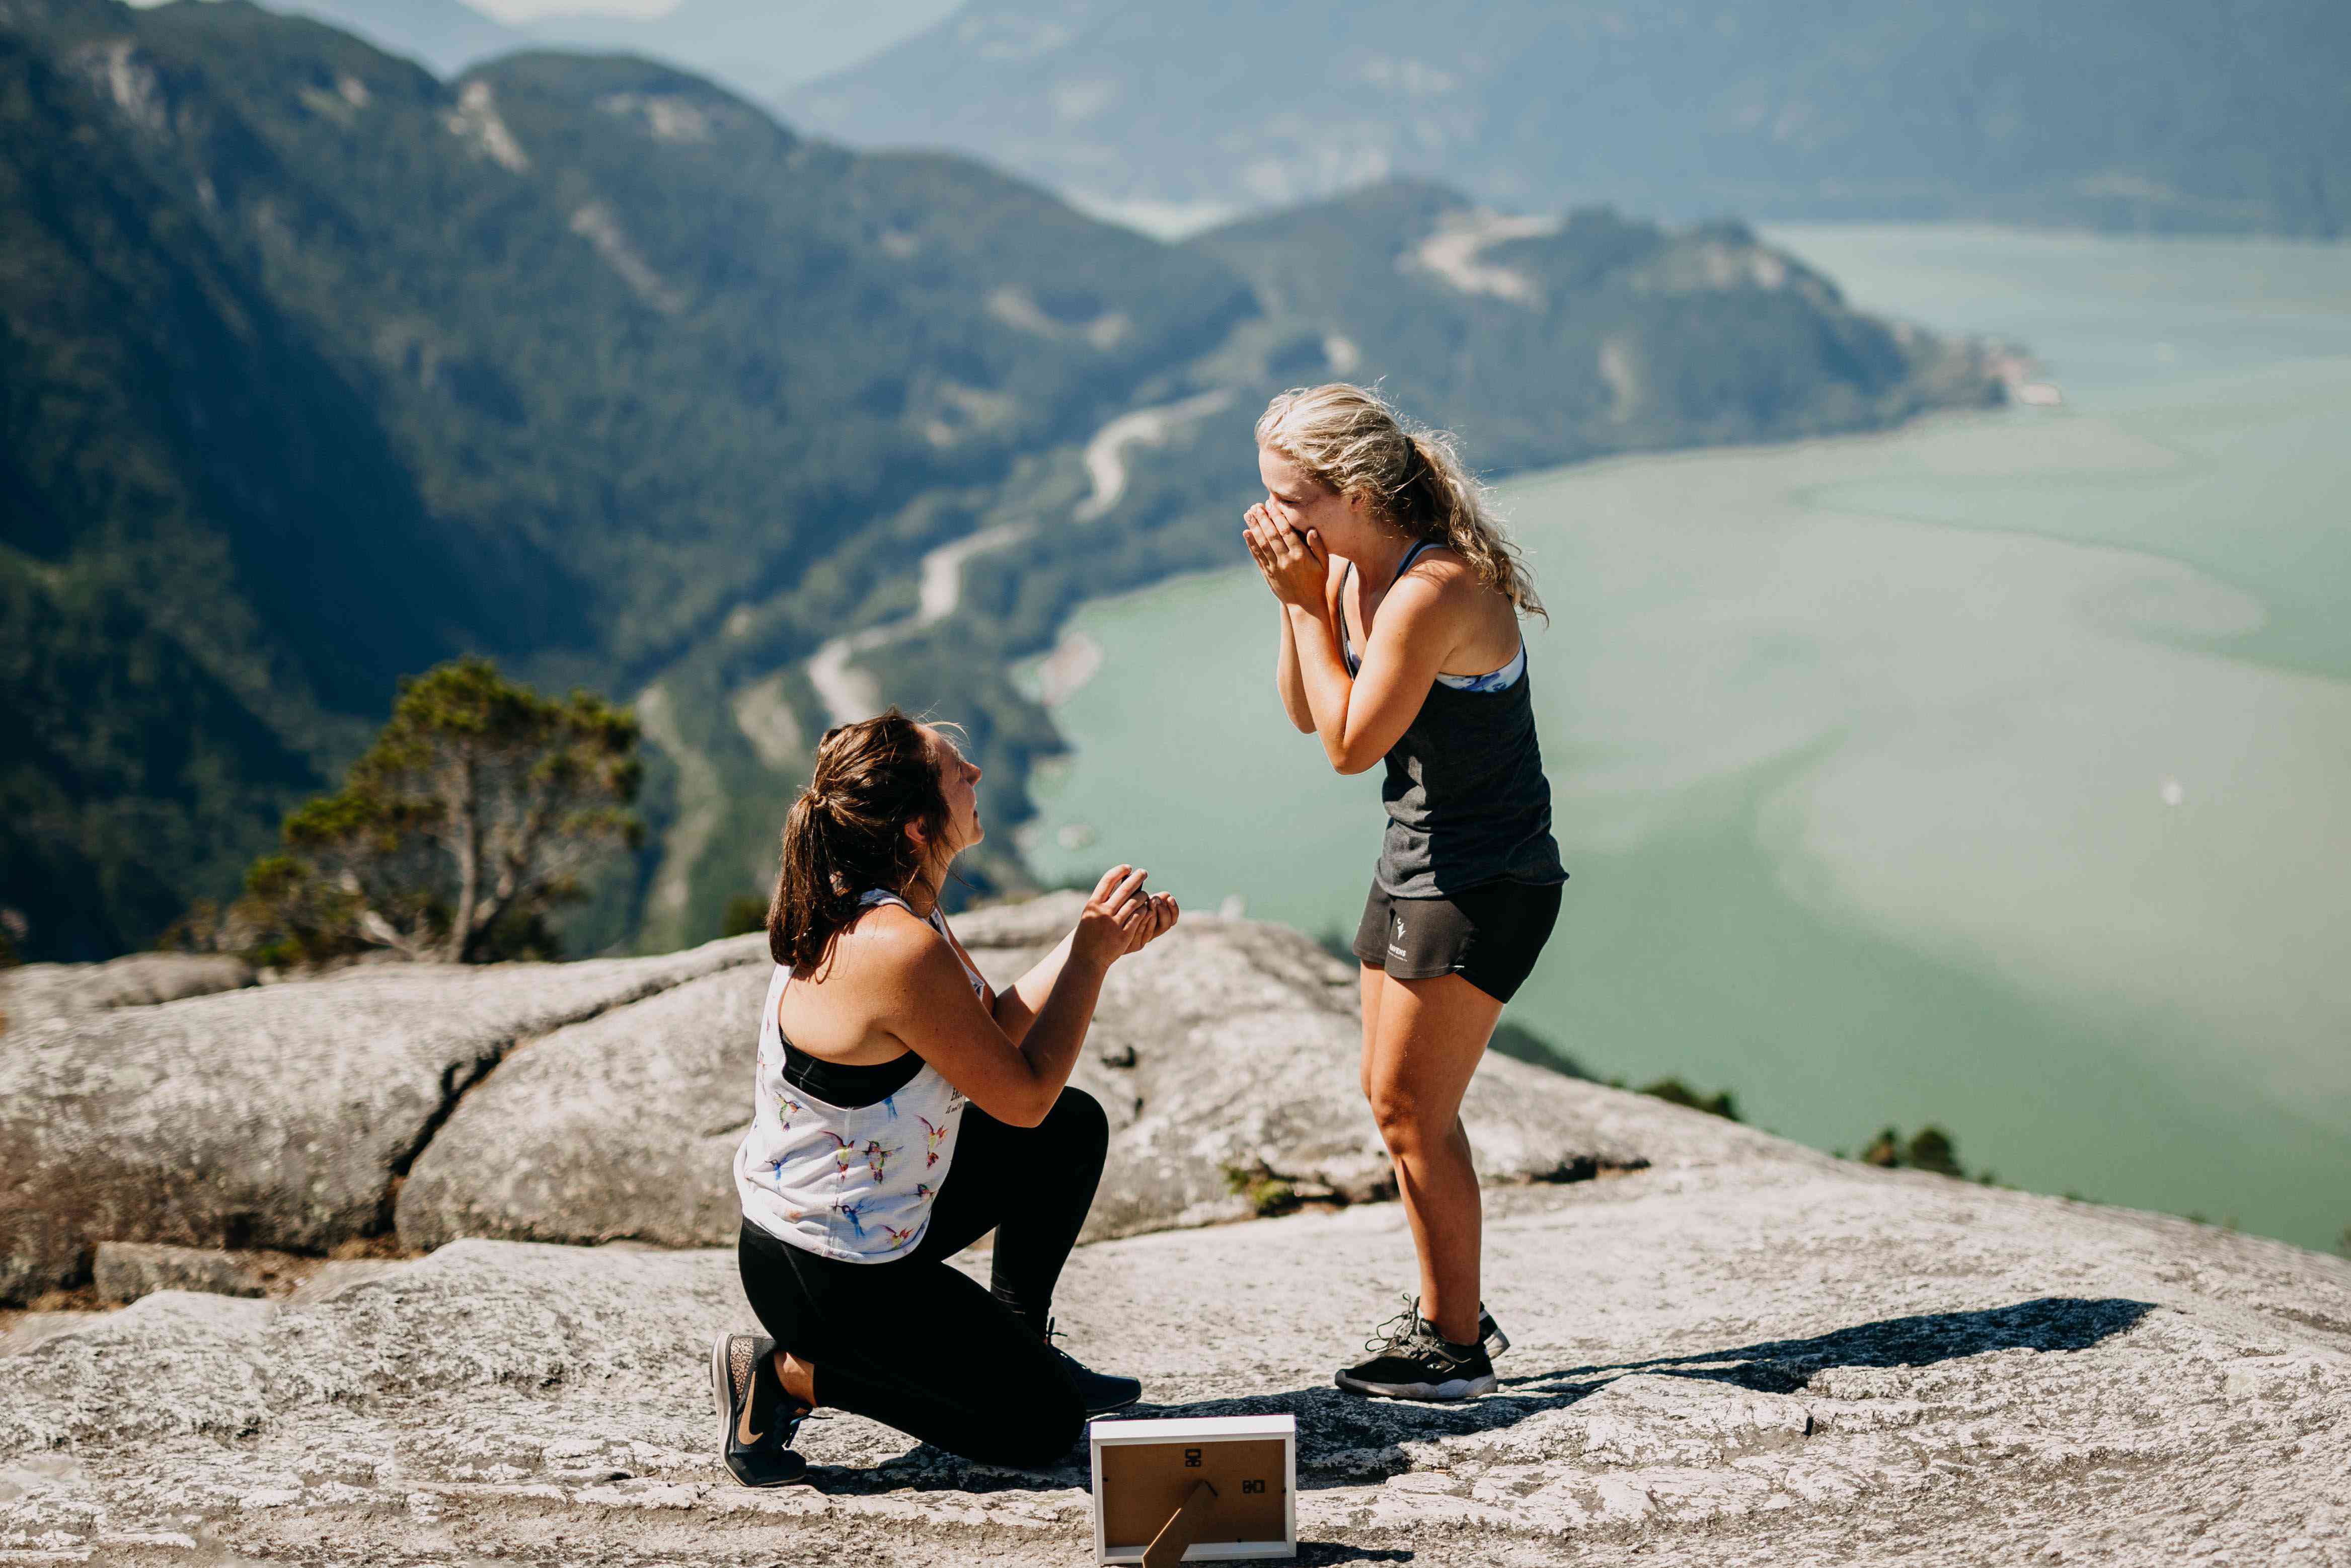 Proposal Goals Alert! These 37 Proposal Photo Are Crazy Epic